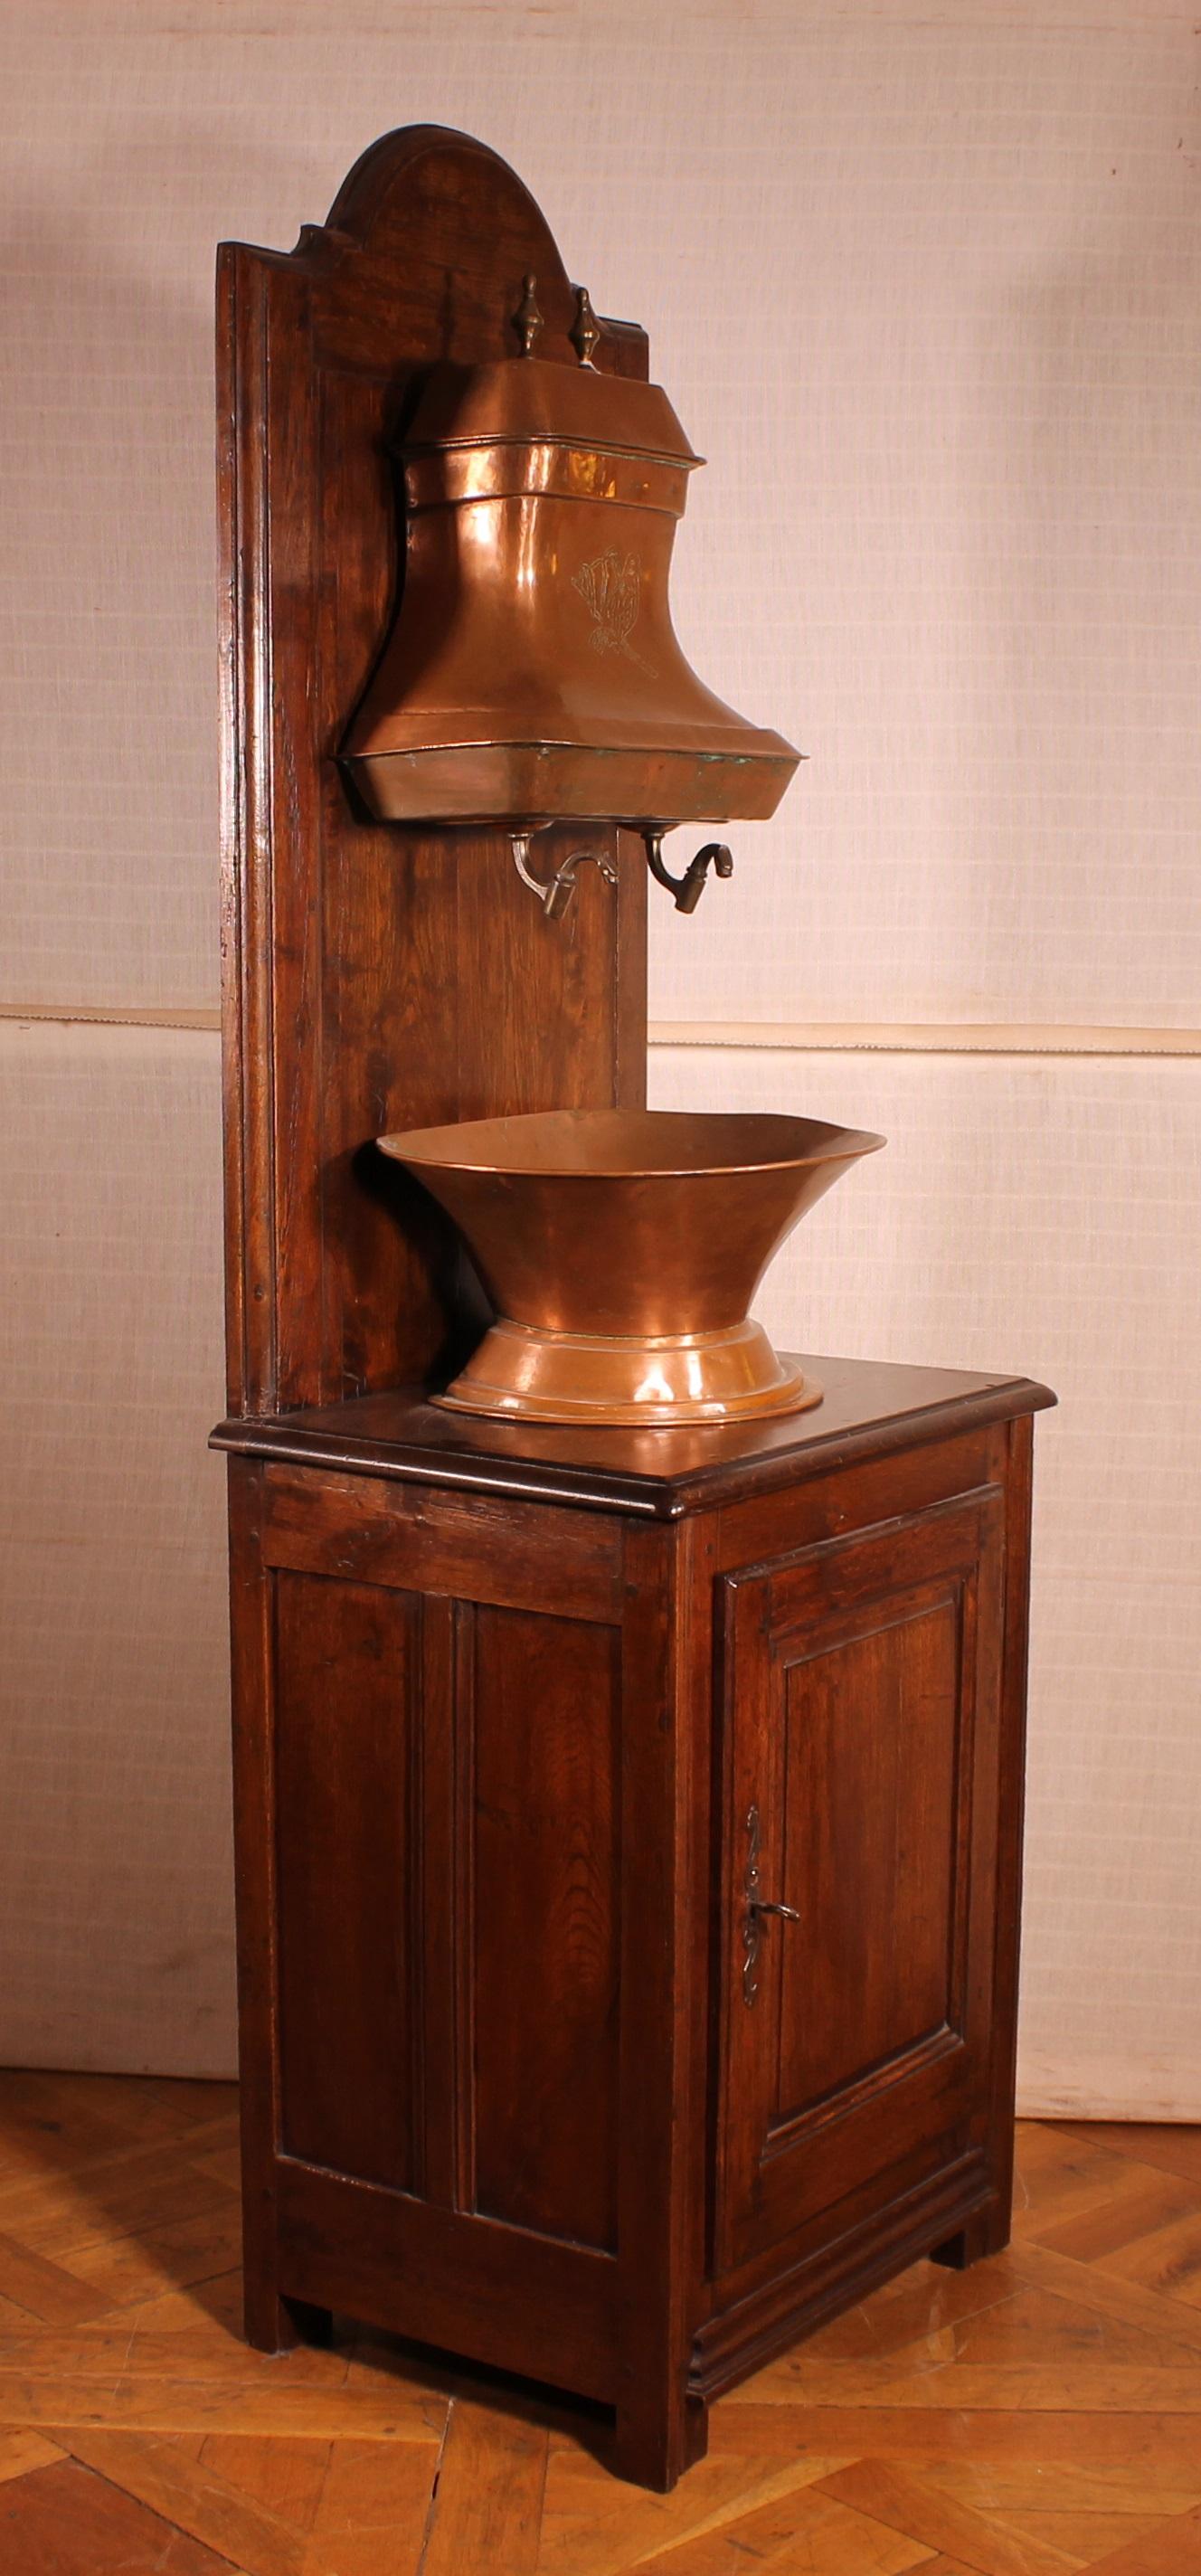 Washstand with Copper Reservoir, 19th Century, France For Sale 4